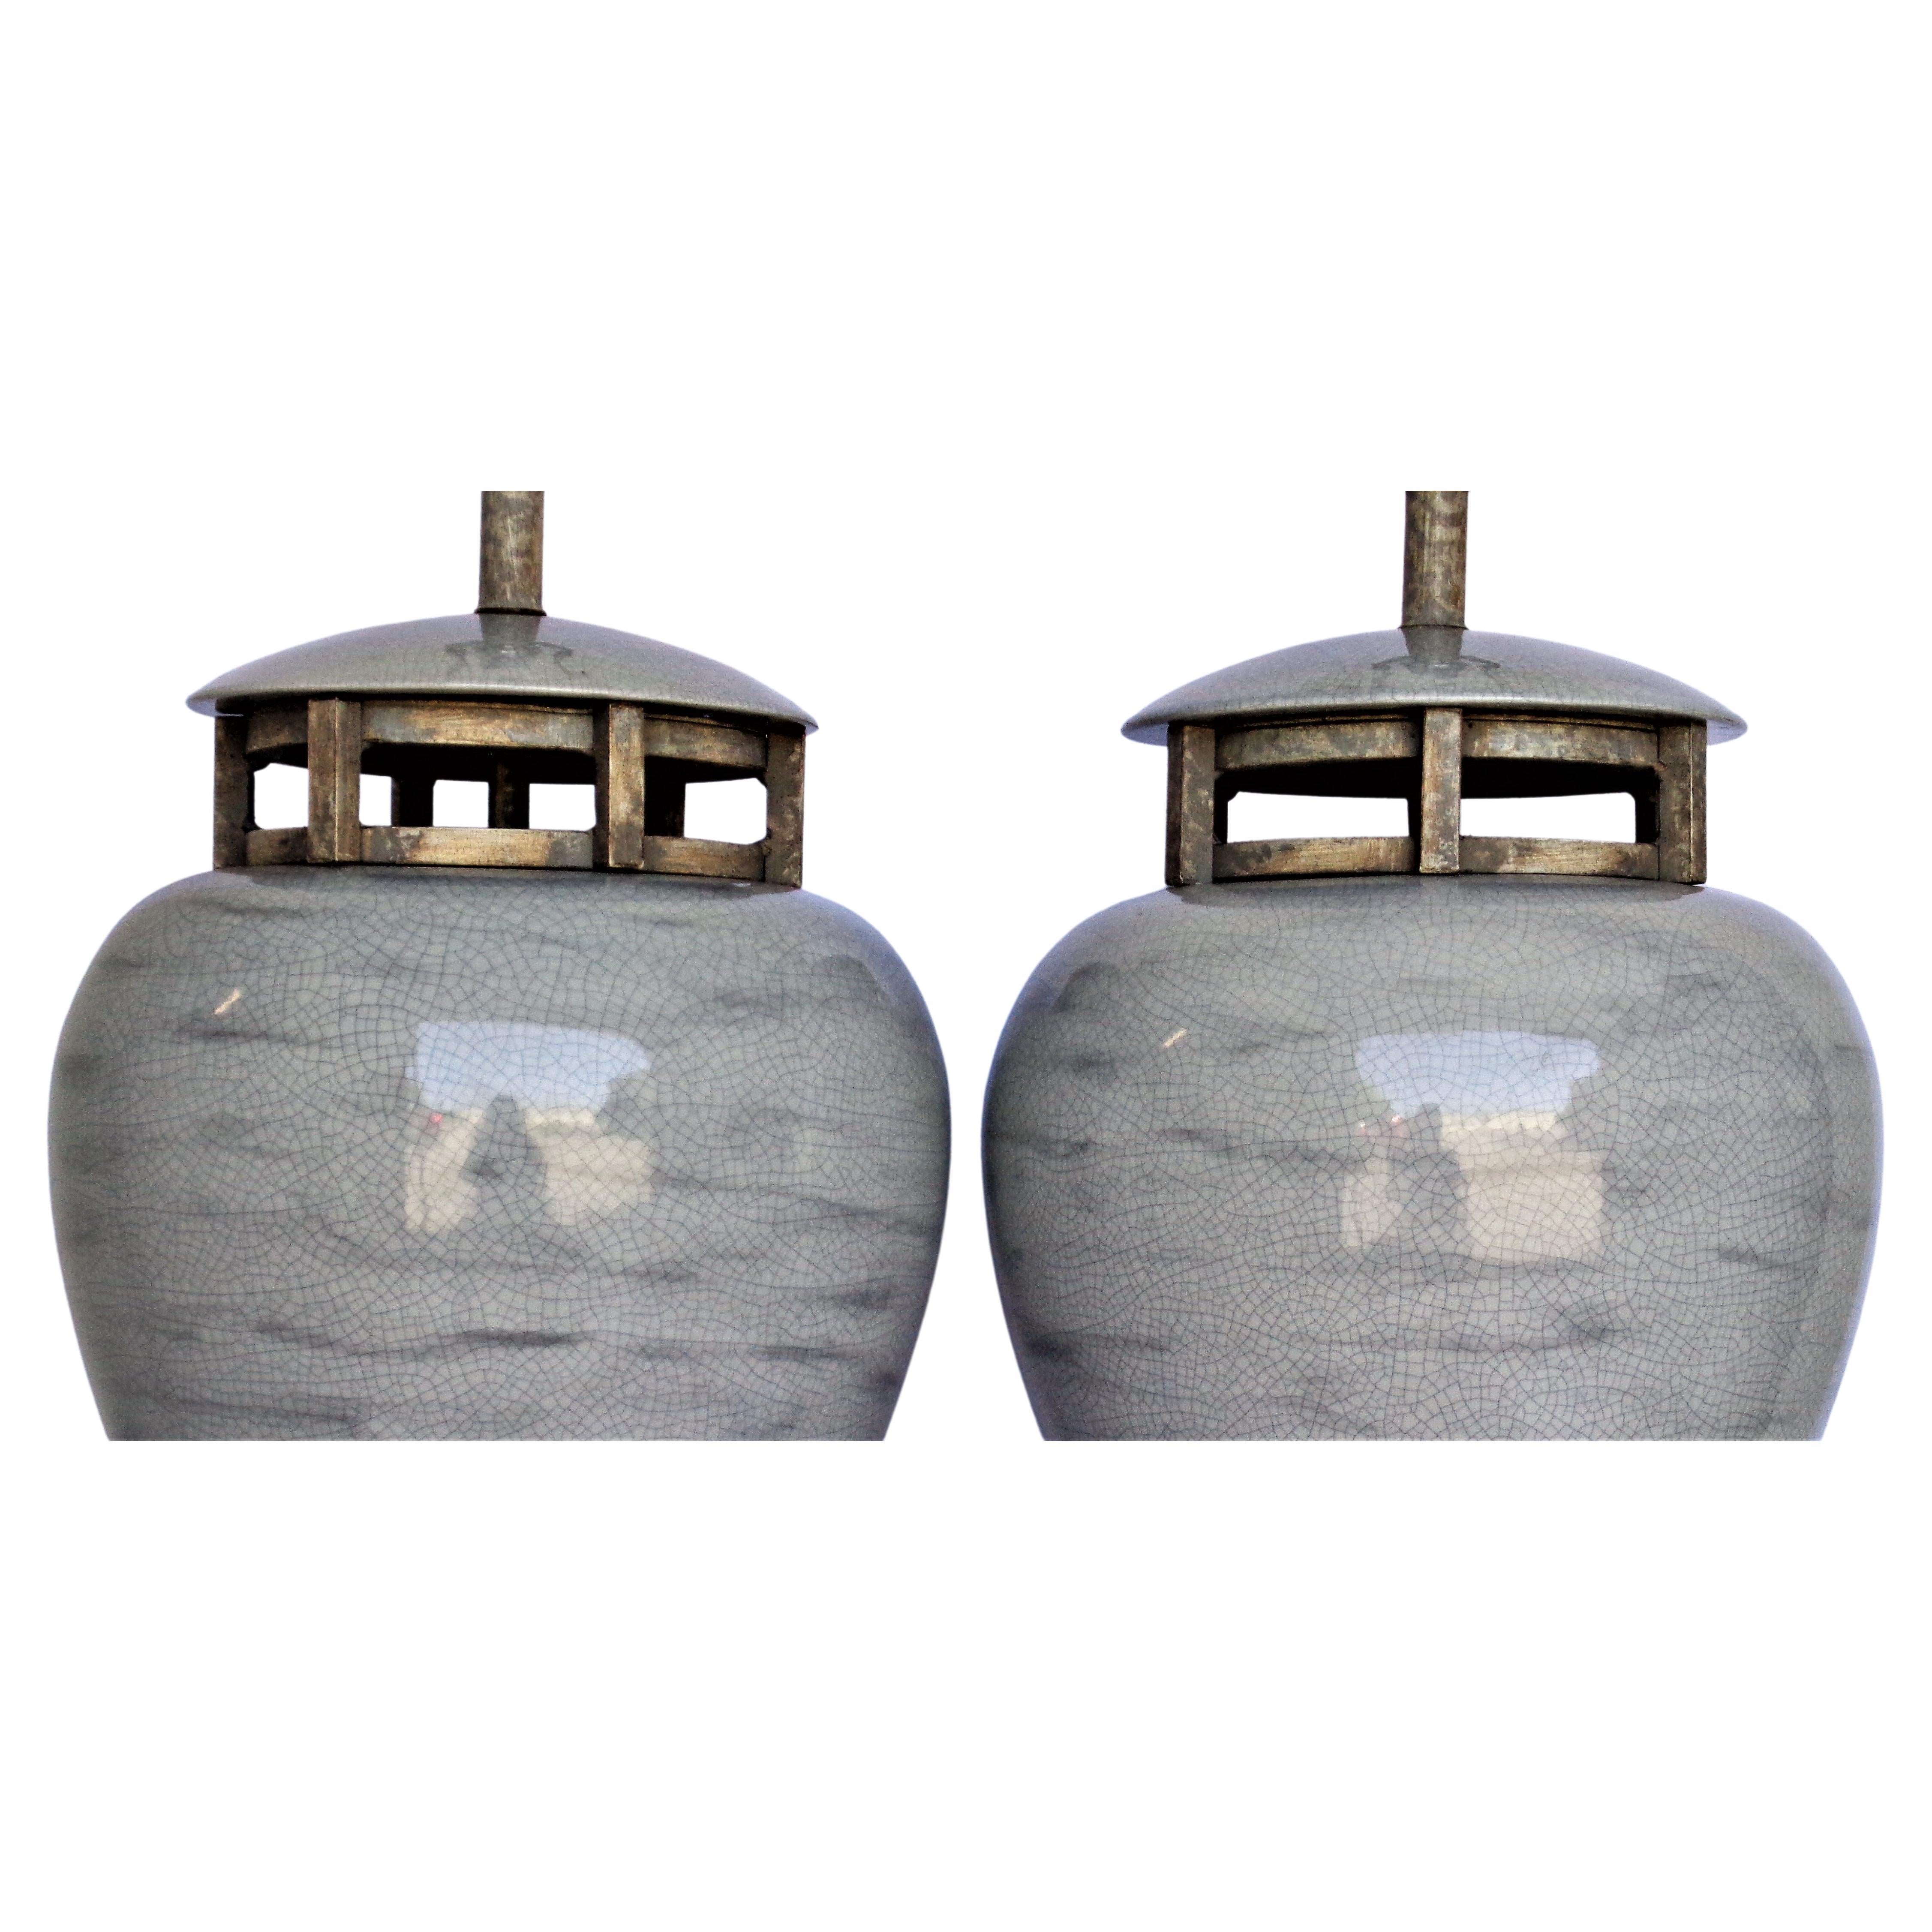 20th Century Large Scale Neoclassical Modern Crackle Glazed Ceramic Table Lamps, 1970's